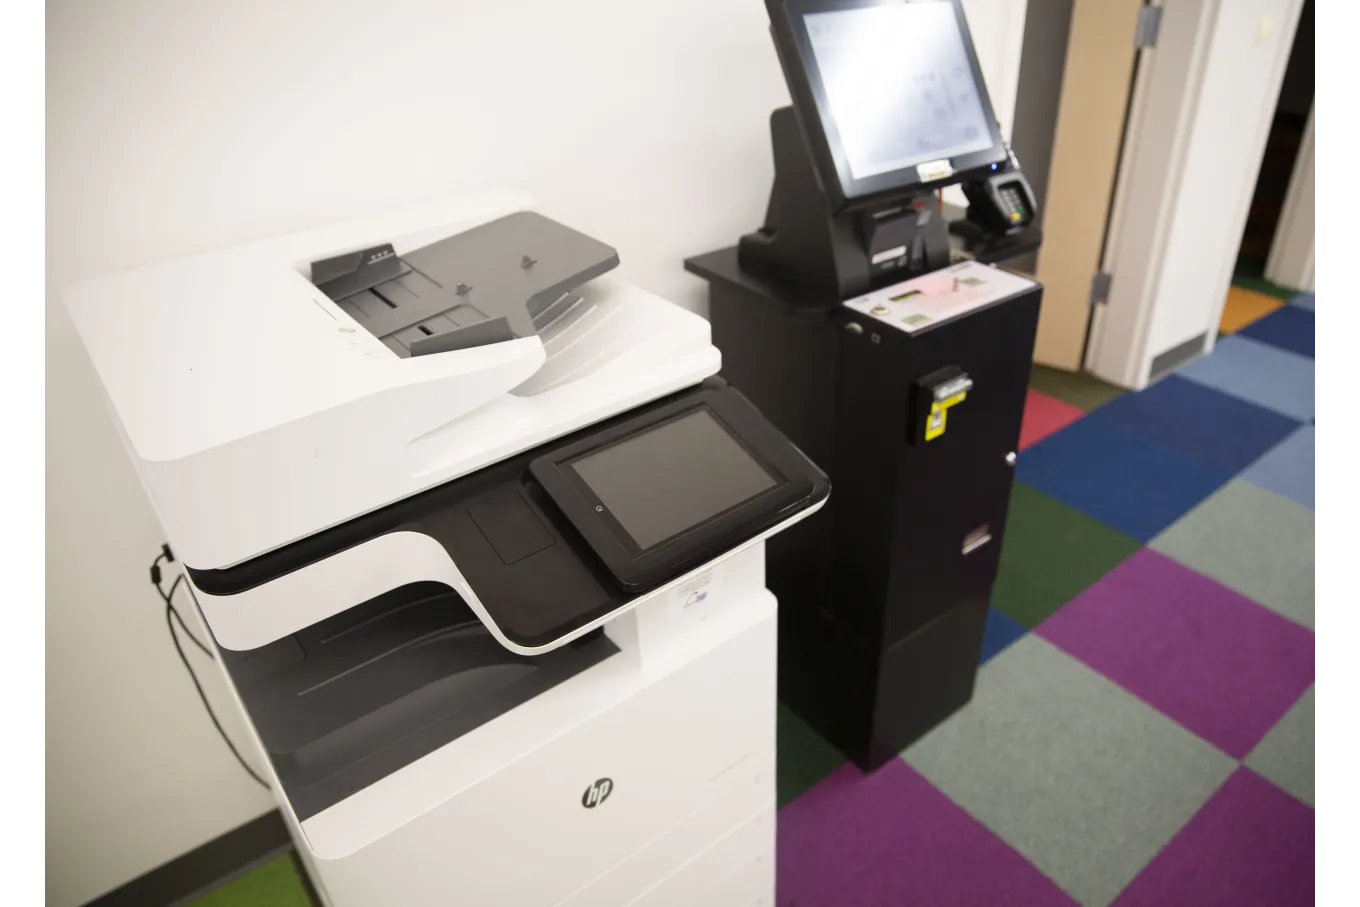 Copy, Print, Fax or Scan at Southeast 